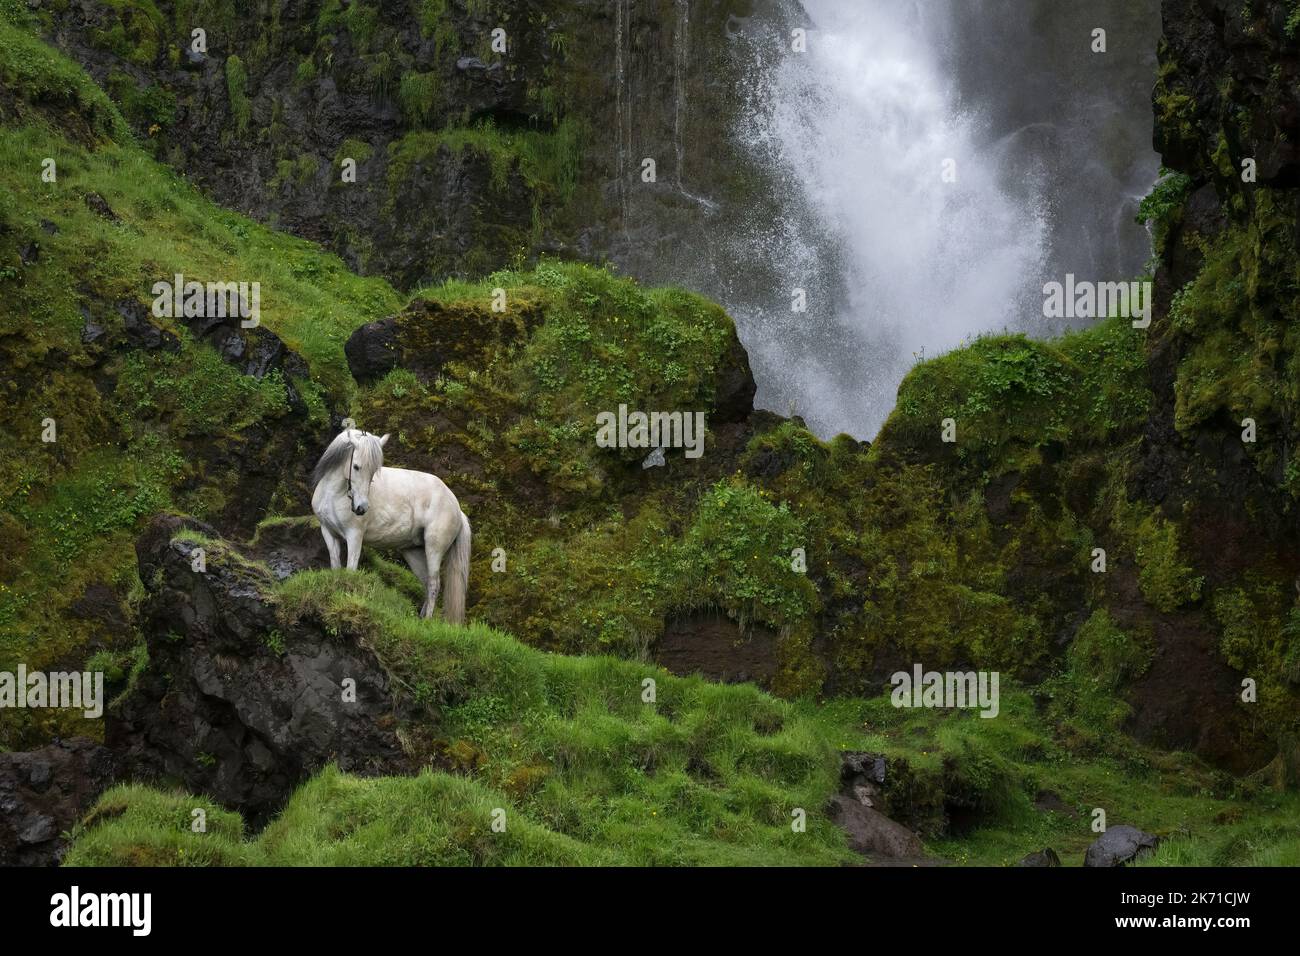 Gray (white) horse standing in front of a waterfall surrounded by moss covered rocks Stock Photo